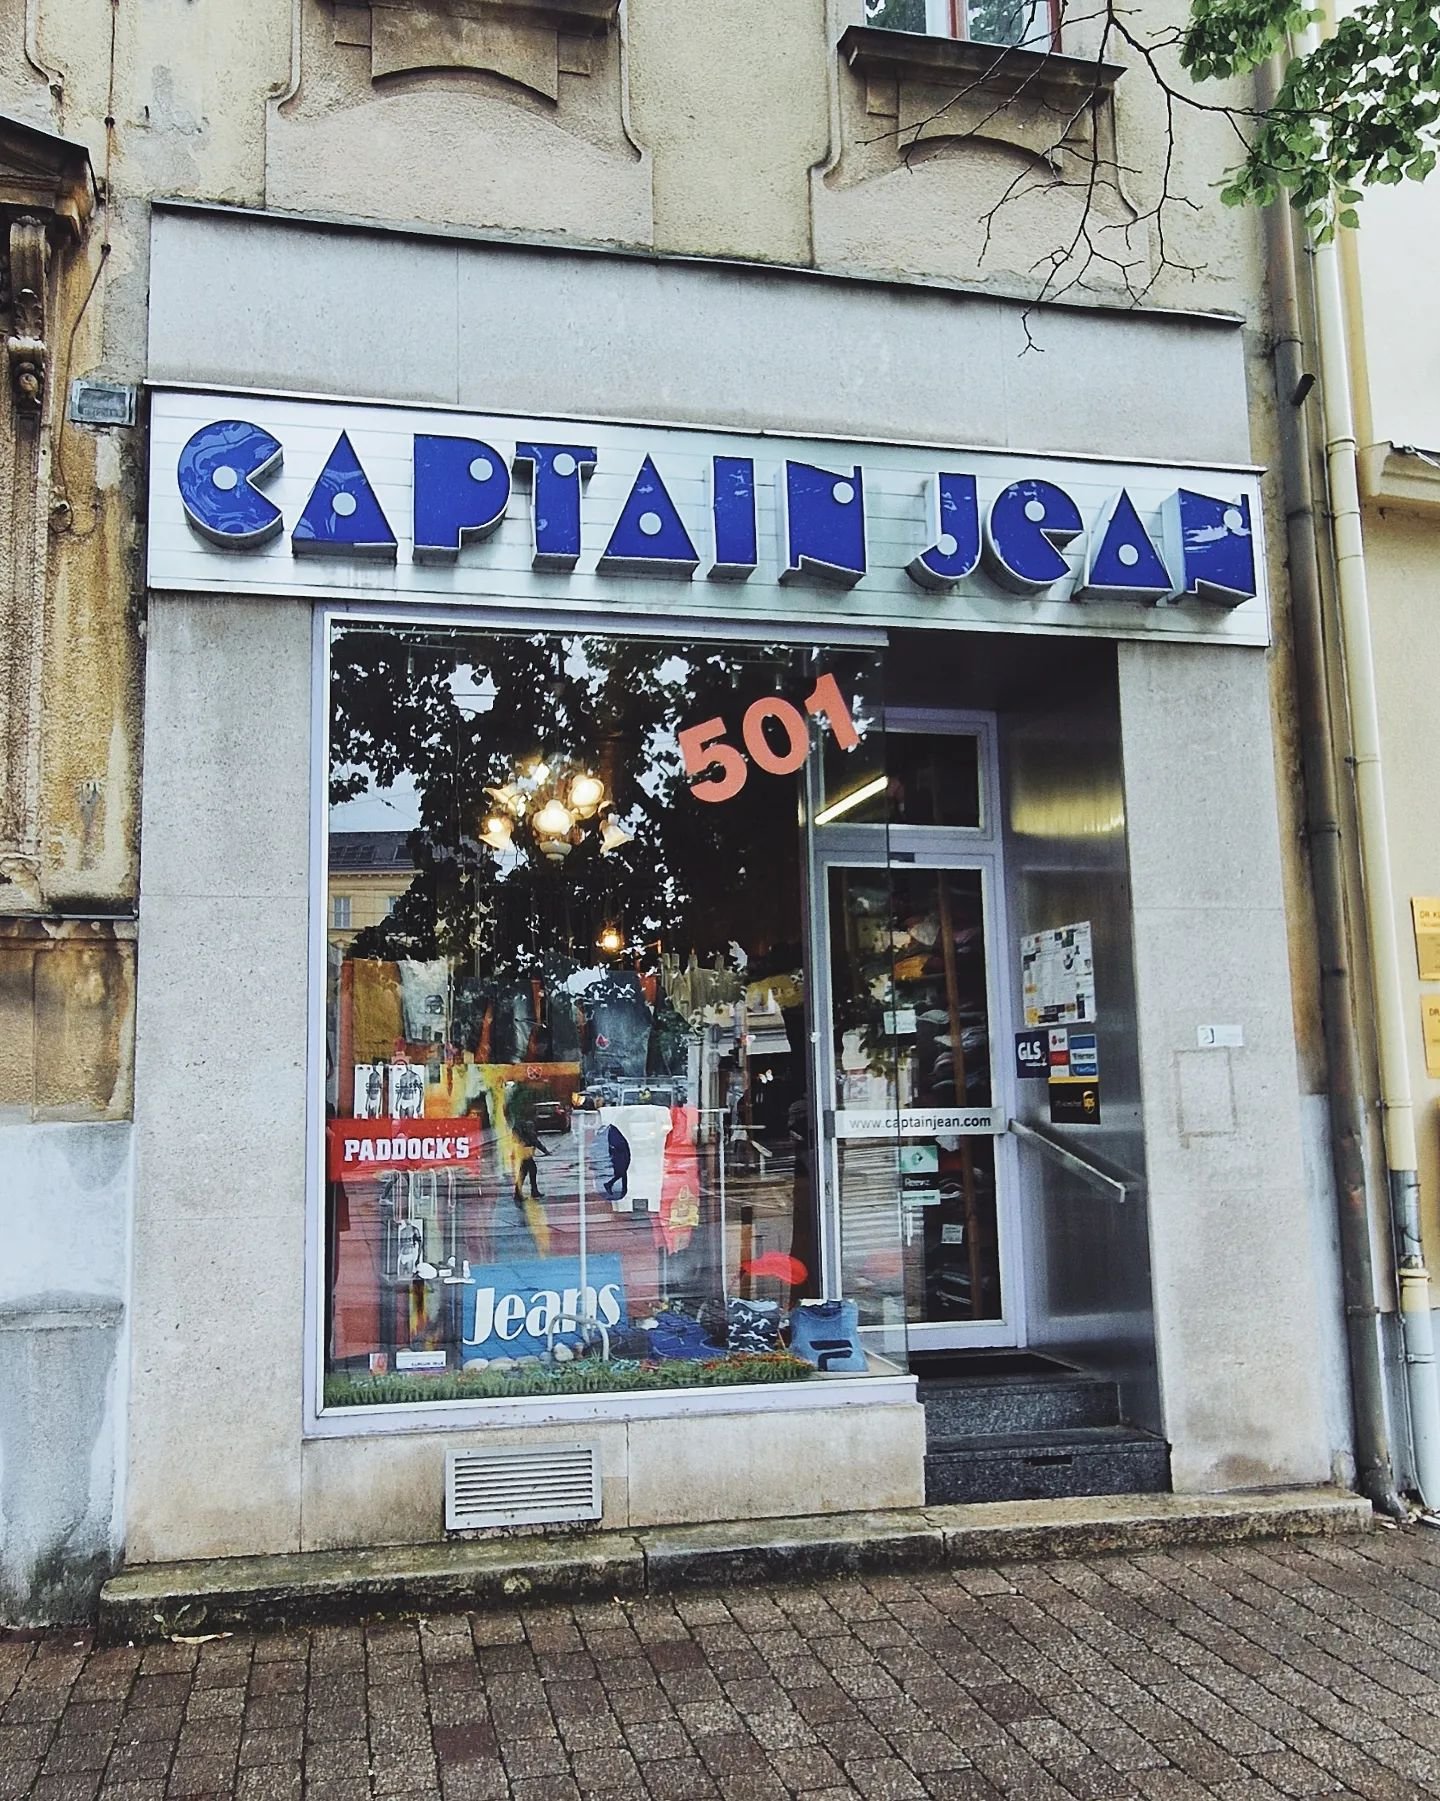 Linzerstra&szlig;e, 1130
#
#font #schrift #abc #type #typo #typografe #typography #letters #lettering #shopfront #foundtype #typeporn #dailytype #dailyfont #wien #vienna #wienfont #fontwien #curated #city #1130 #austria #storefront #shopfrontspoetry 